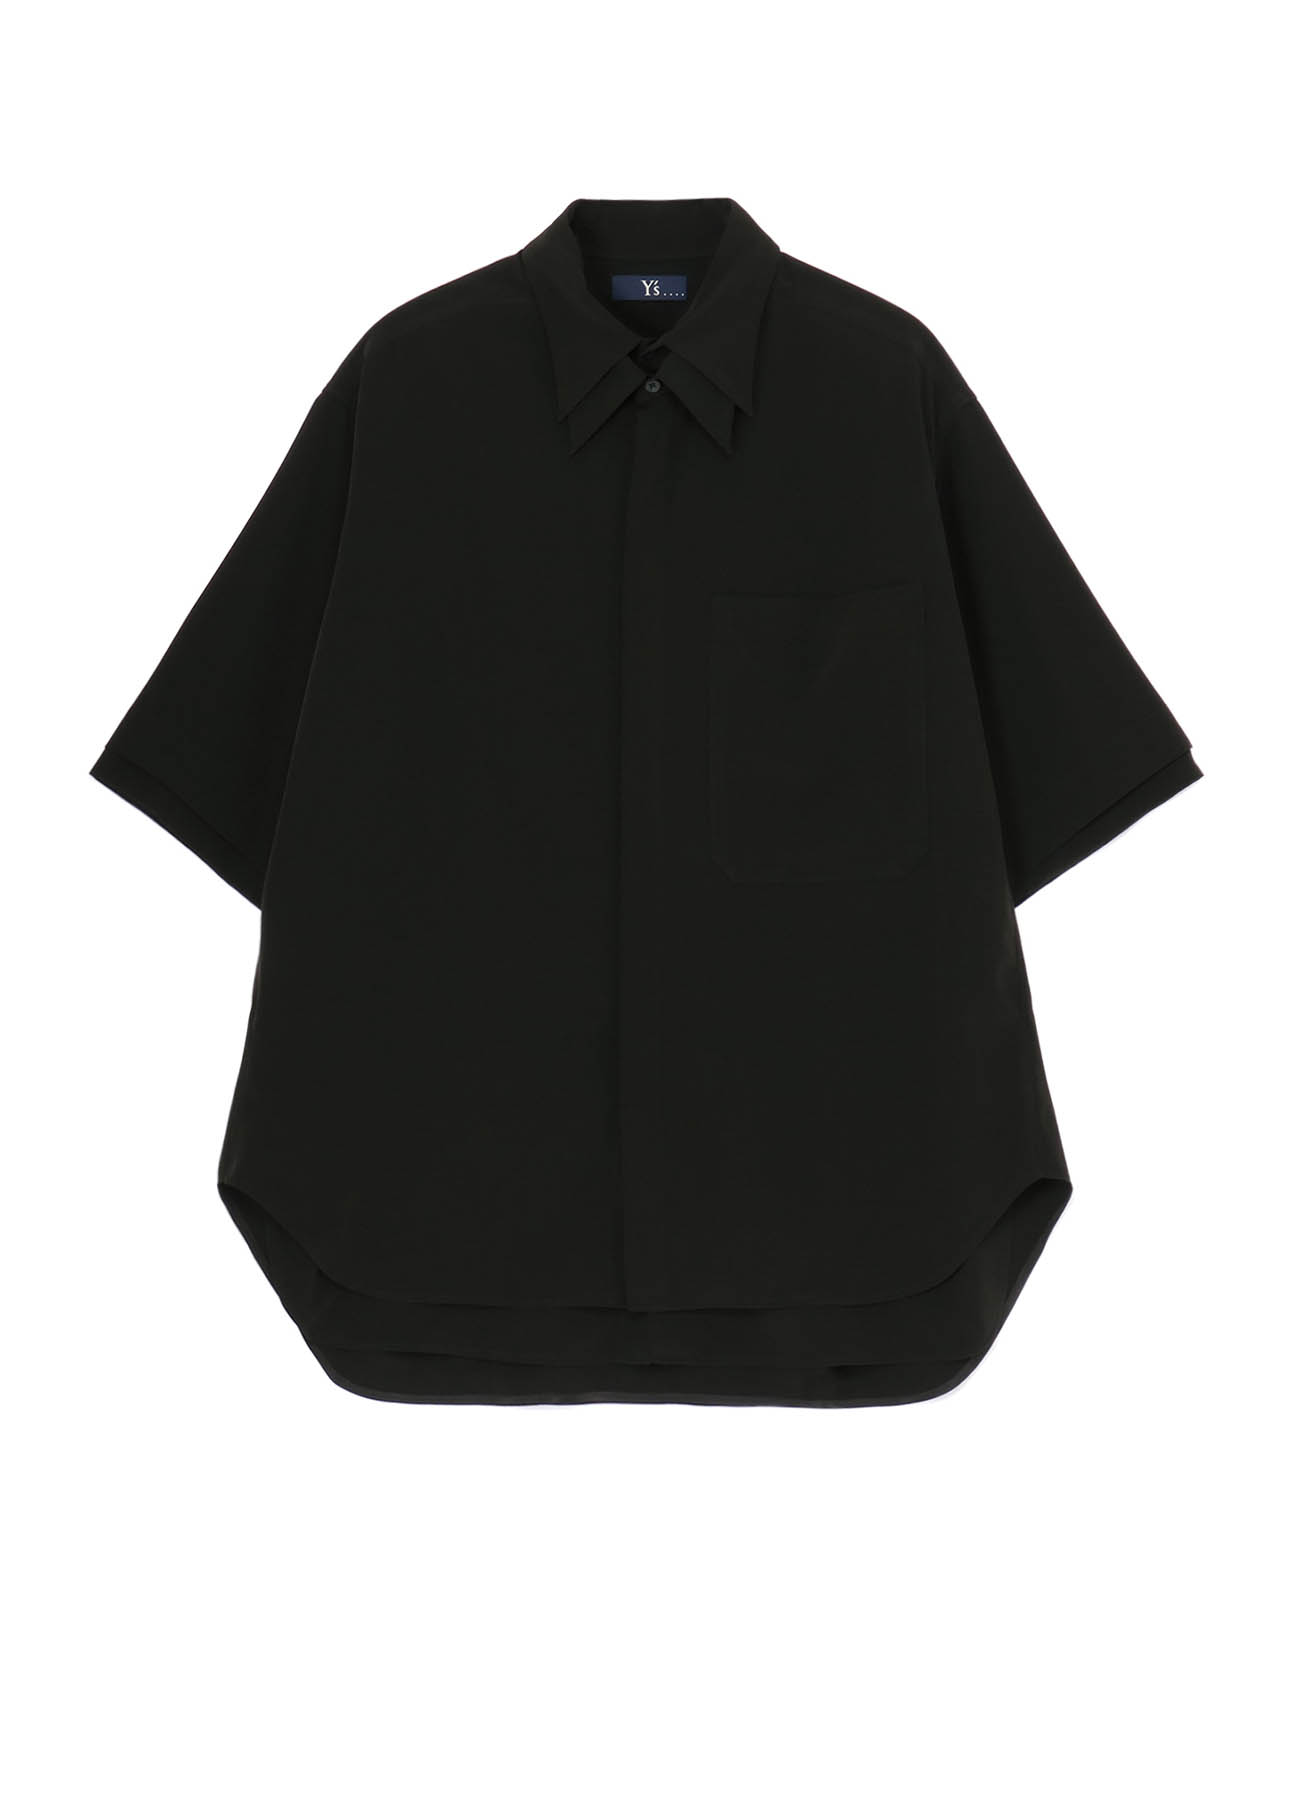 TRIACETATE/POLYESTER DOUBLE LAYERED HALF SLEEVE SHIRT